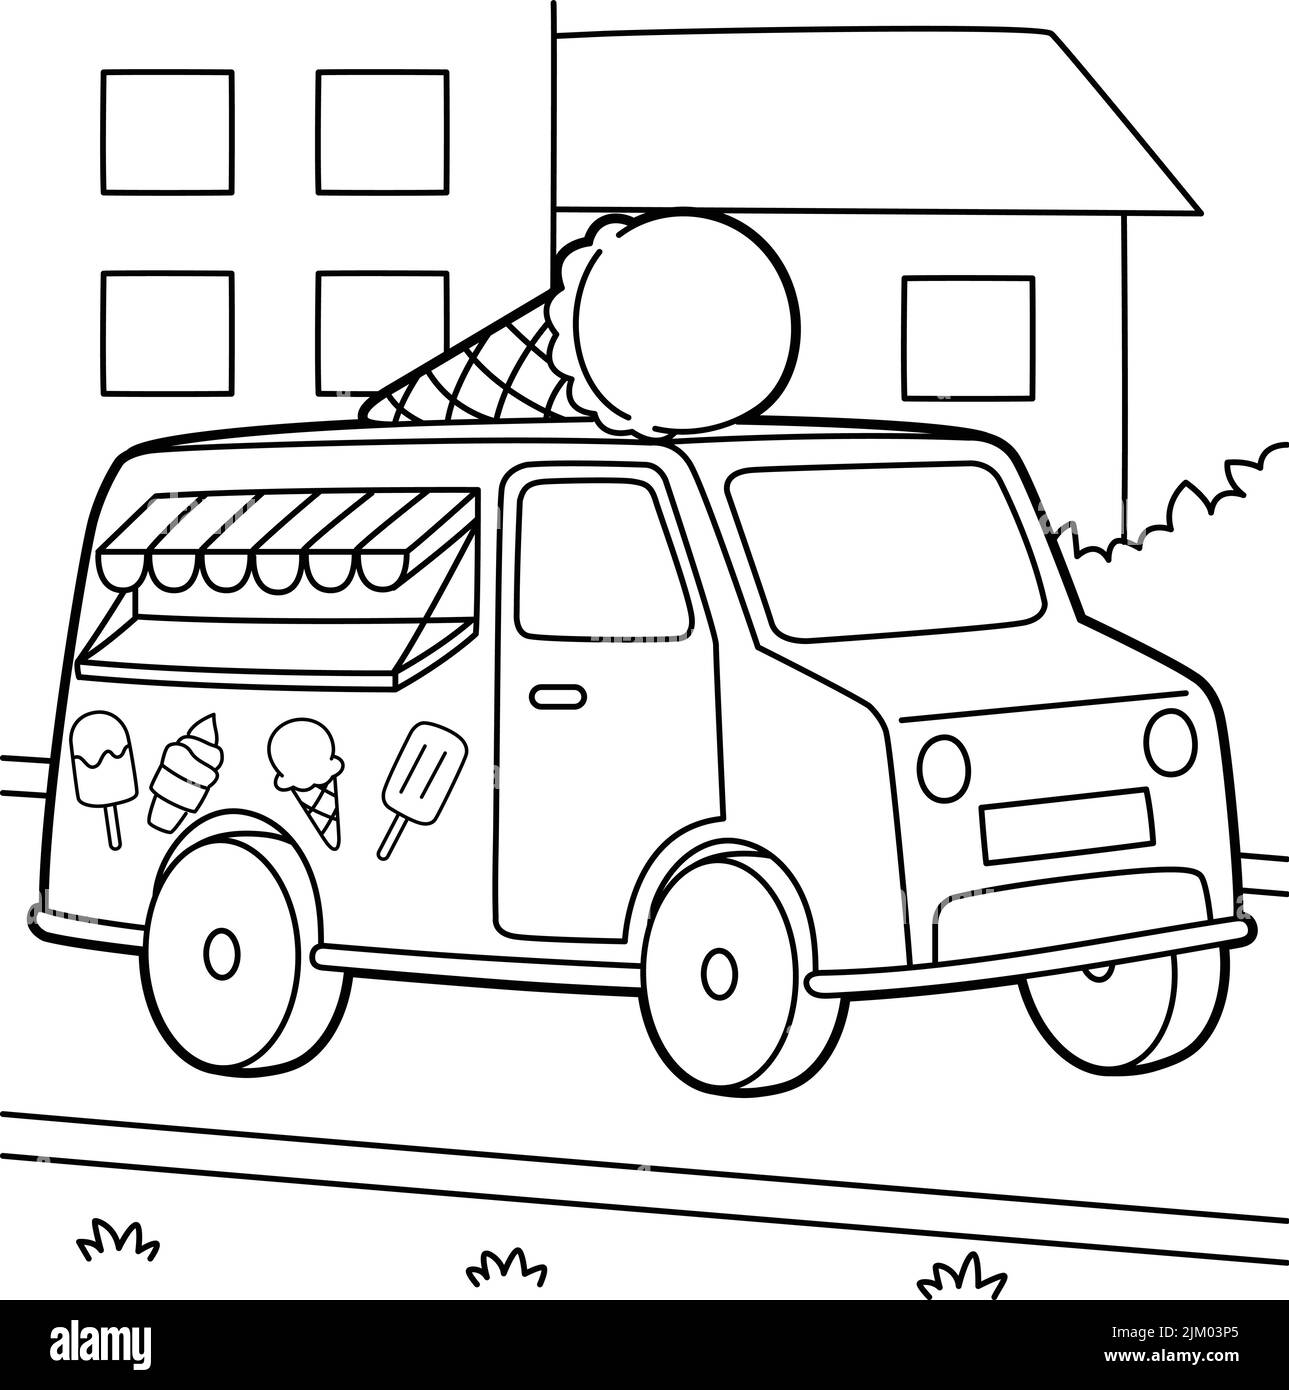 Ice Cream Truck Vehicle Coloring Page for Kids Stock Vector